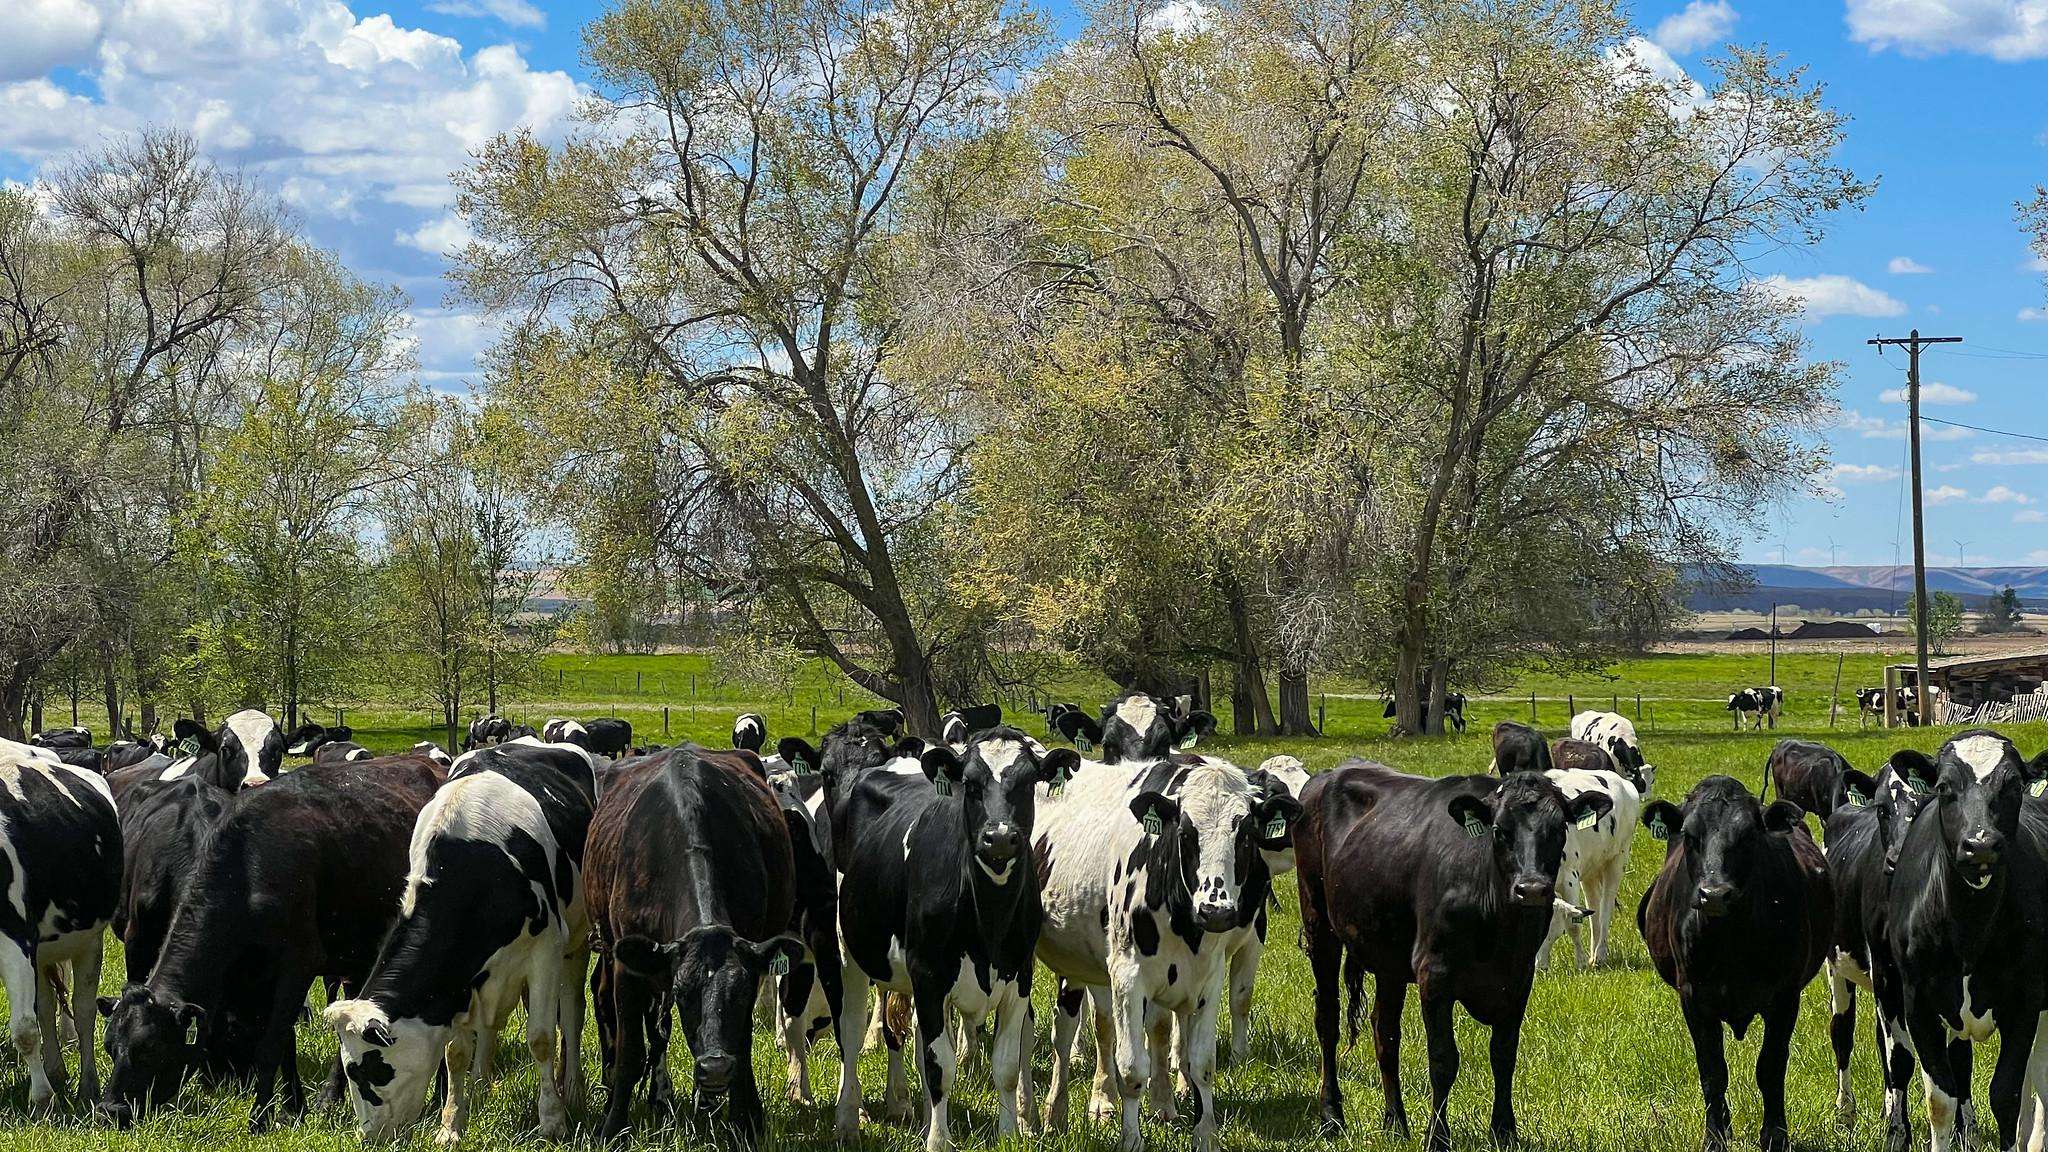 Herd of black/white cows in a pasture with trees in the distance and blue sky above.